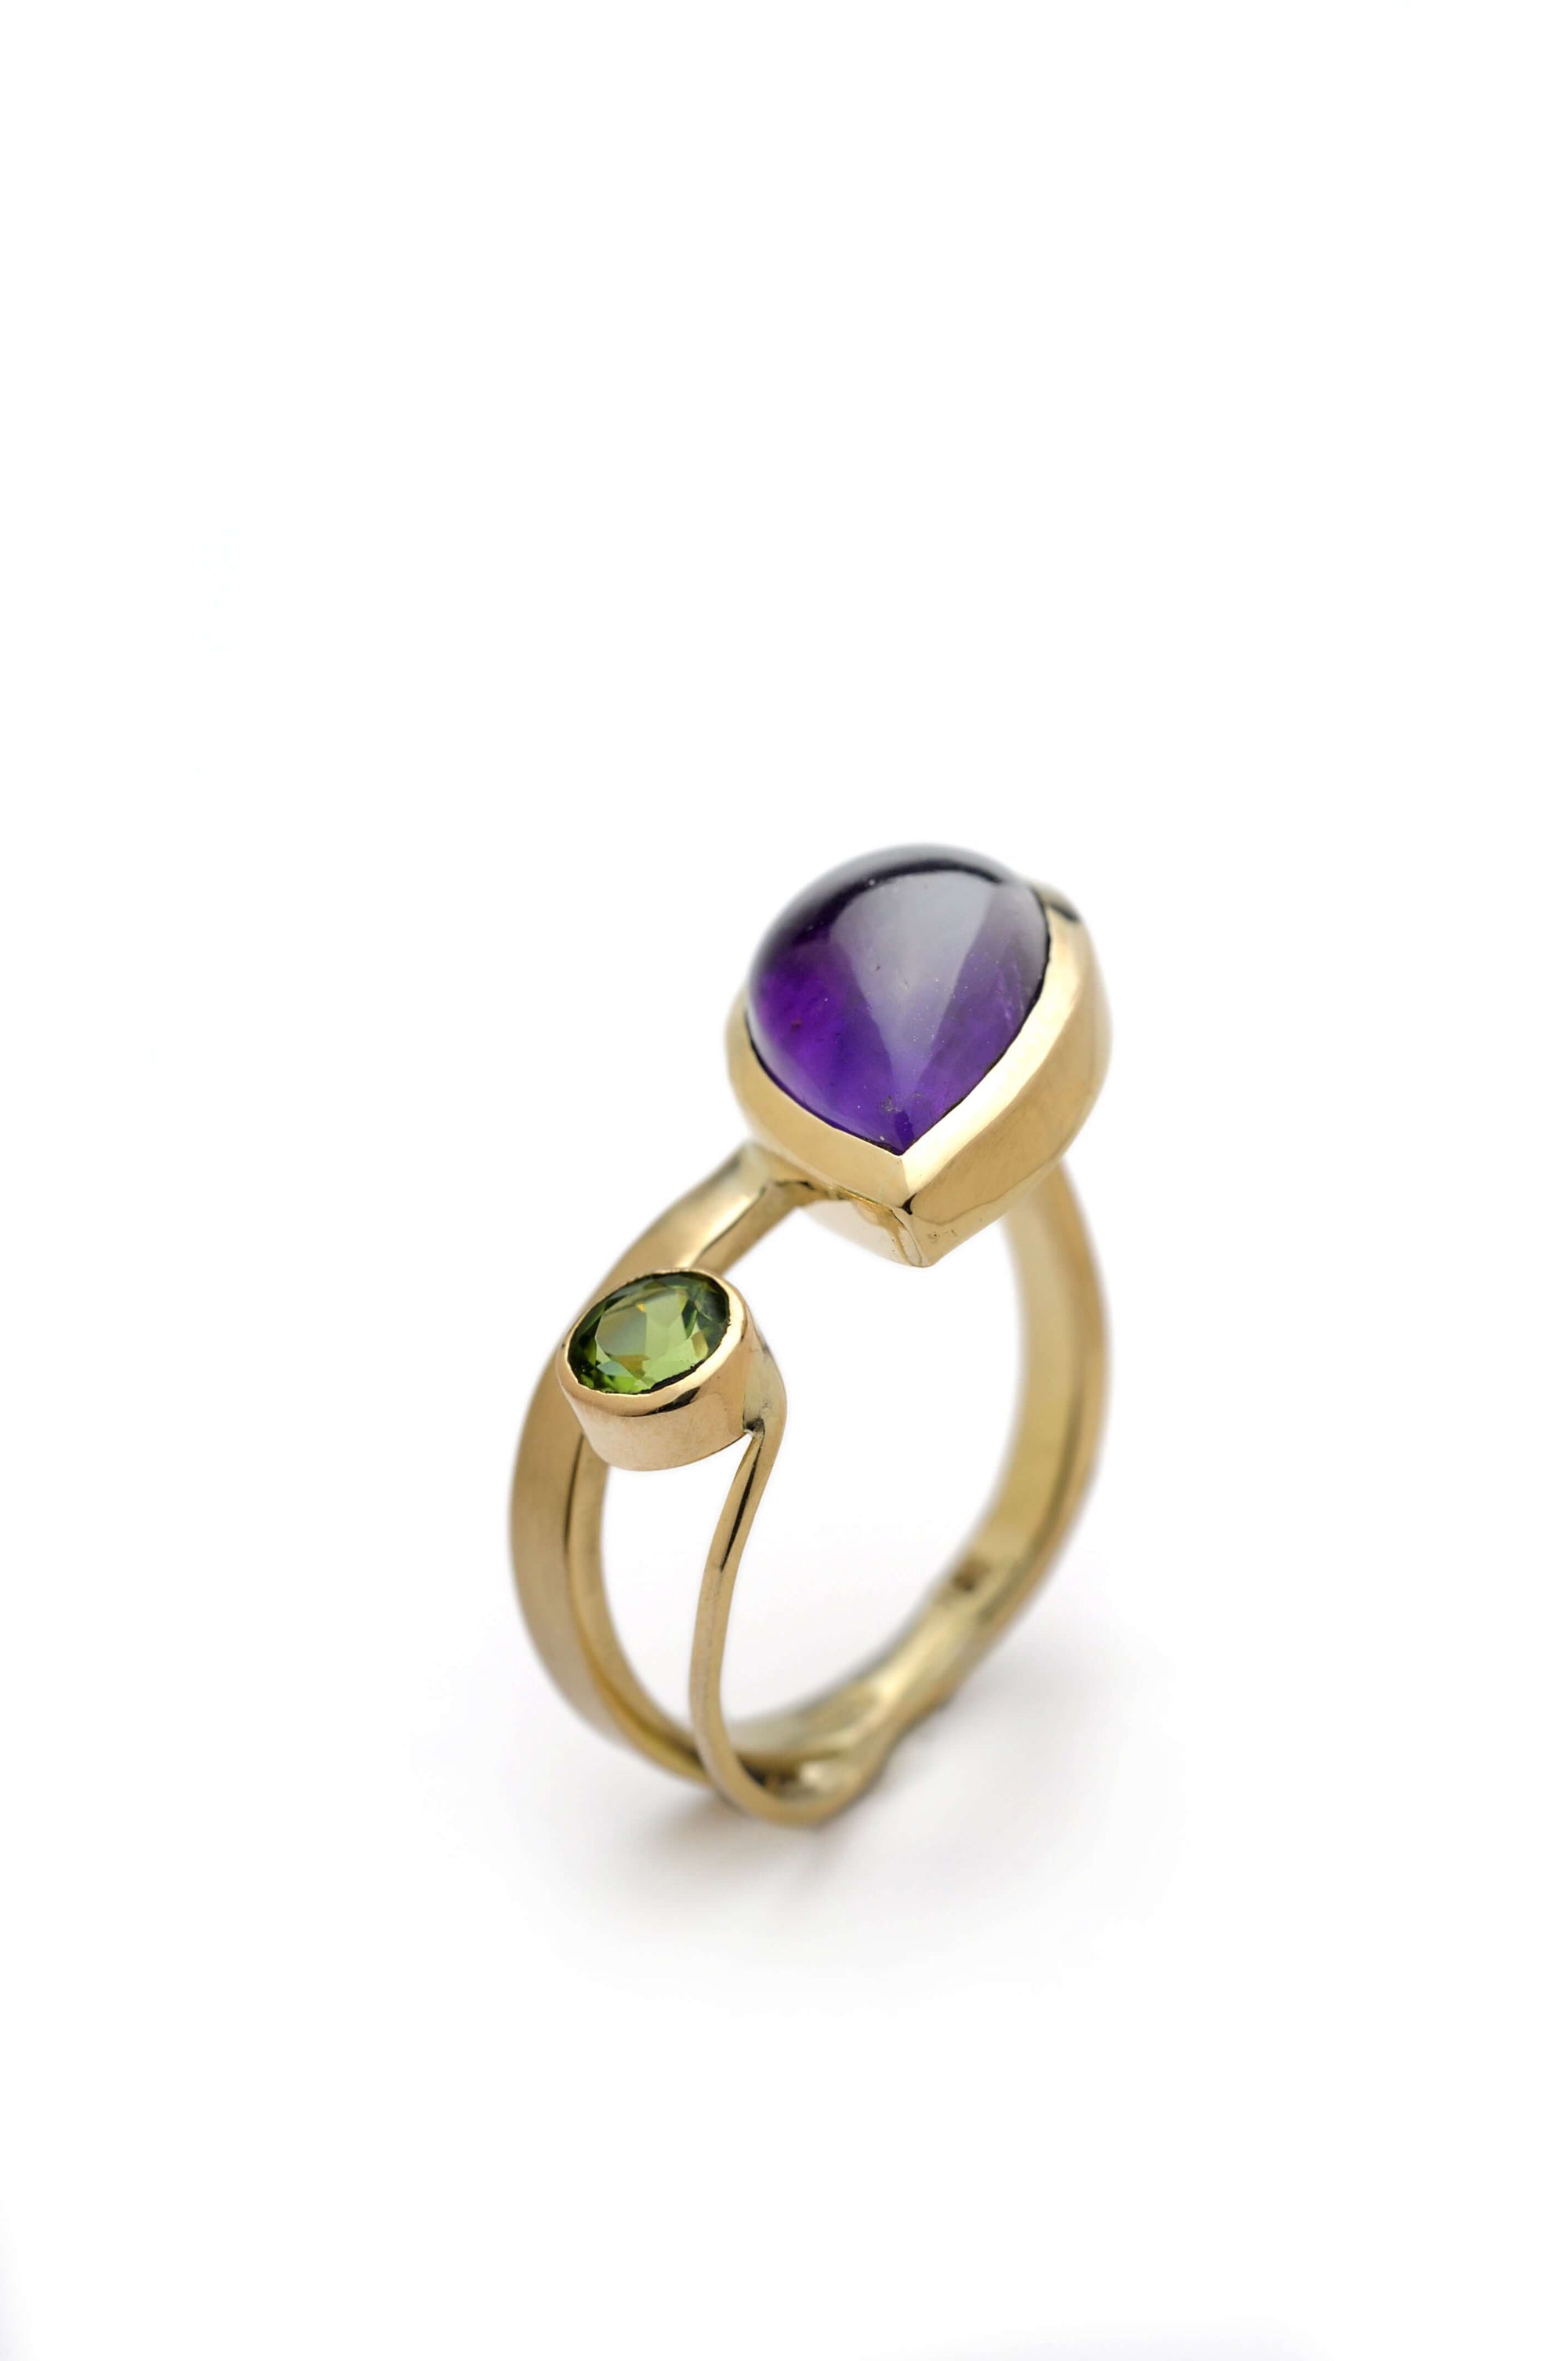 A gold ring with amethyst and peridot, handmade in 18k gold